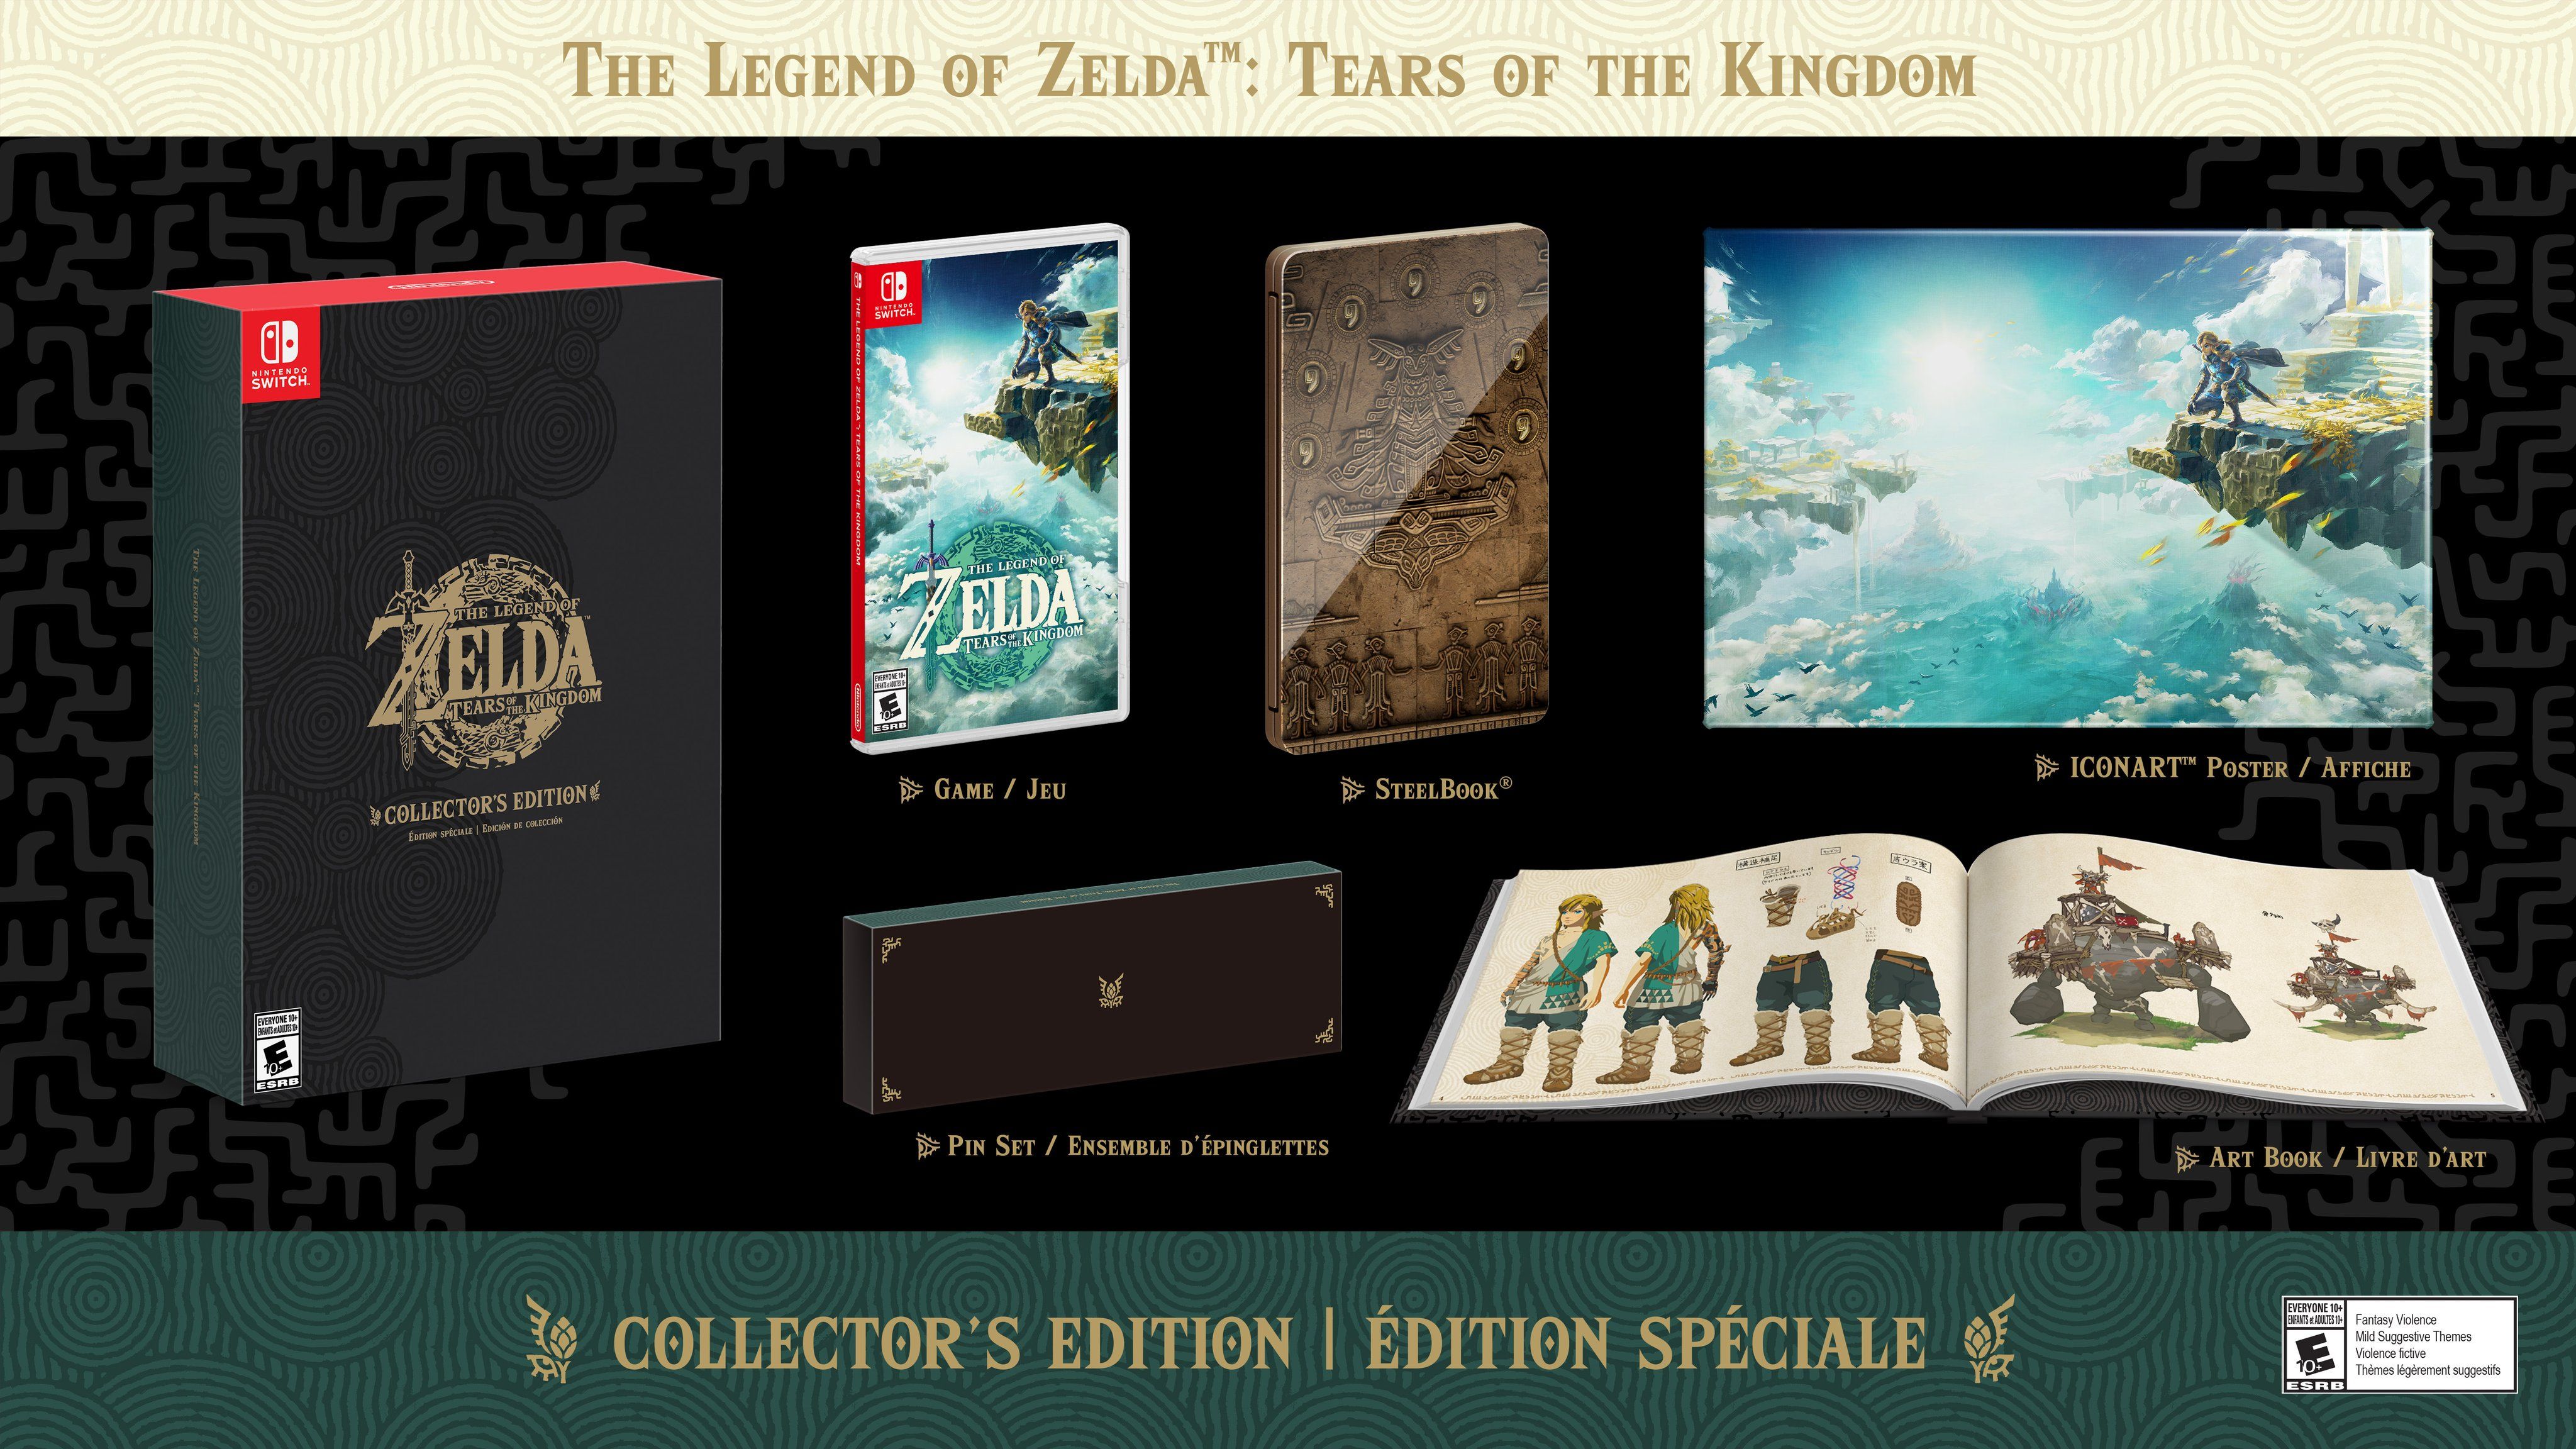 Layout of the items included in the Tears of the Kingdom Collector's Edition, showing the outer box, game box, steelbook, poster, pin set, and art book.